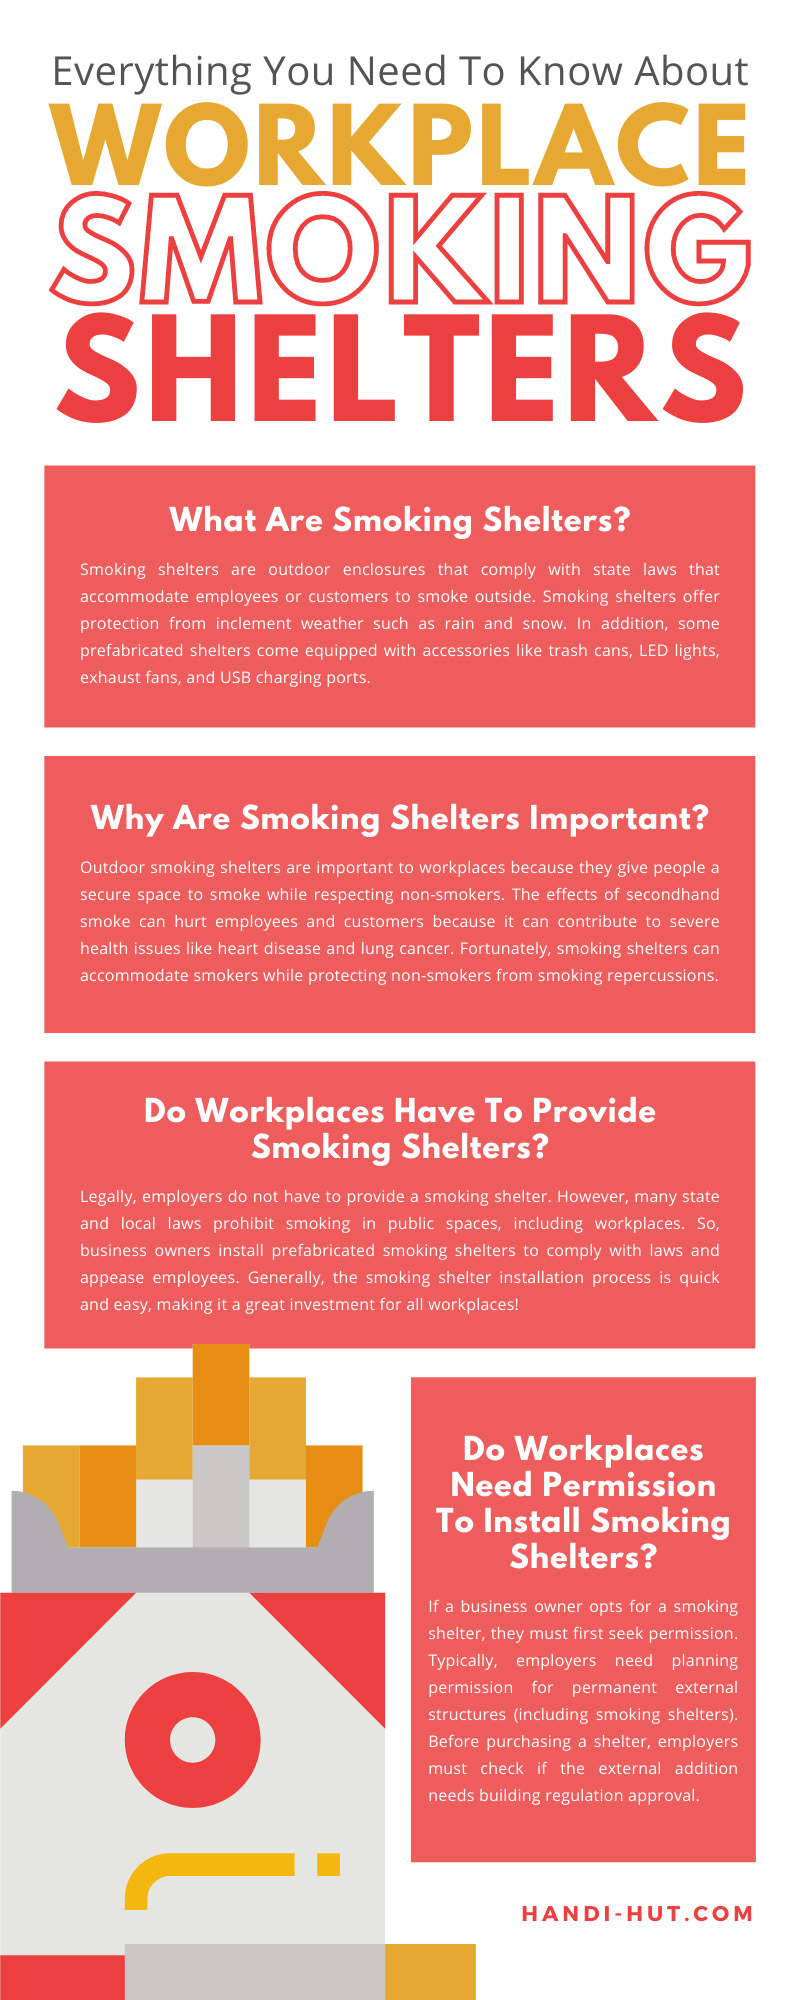 Everything You Need To Know About Workplace Smoking Shelters